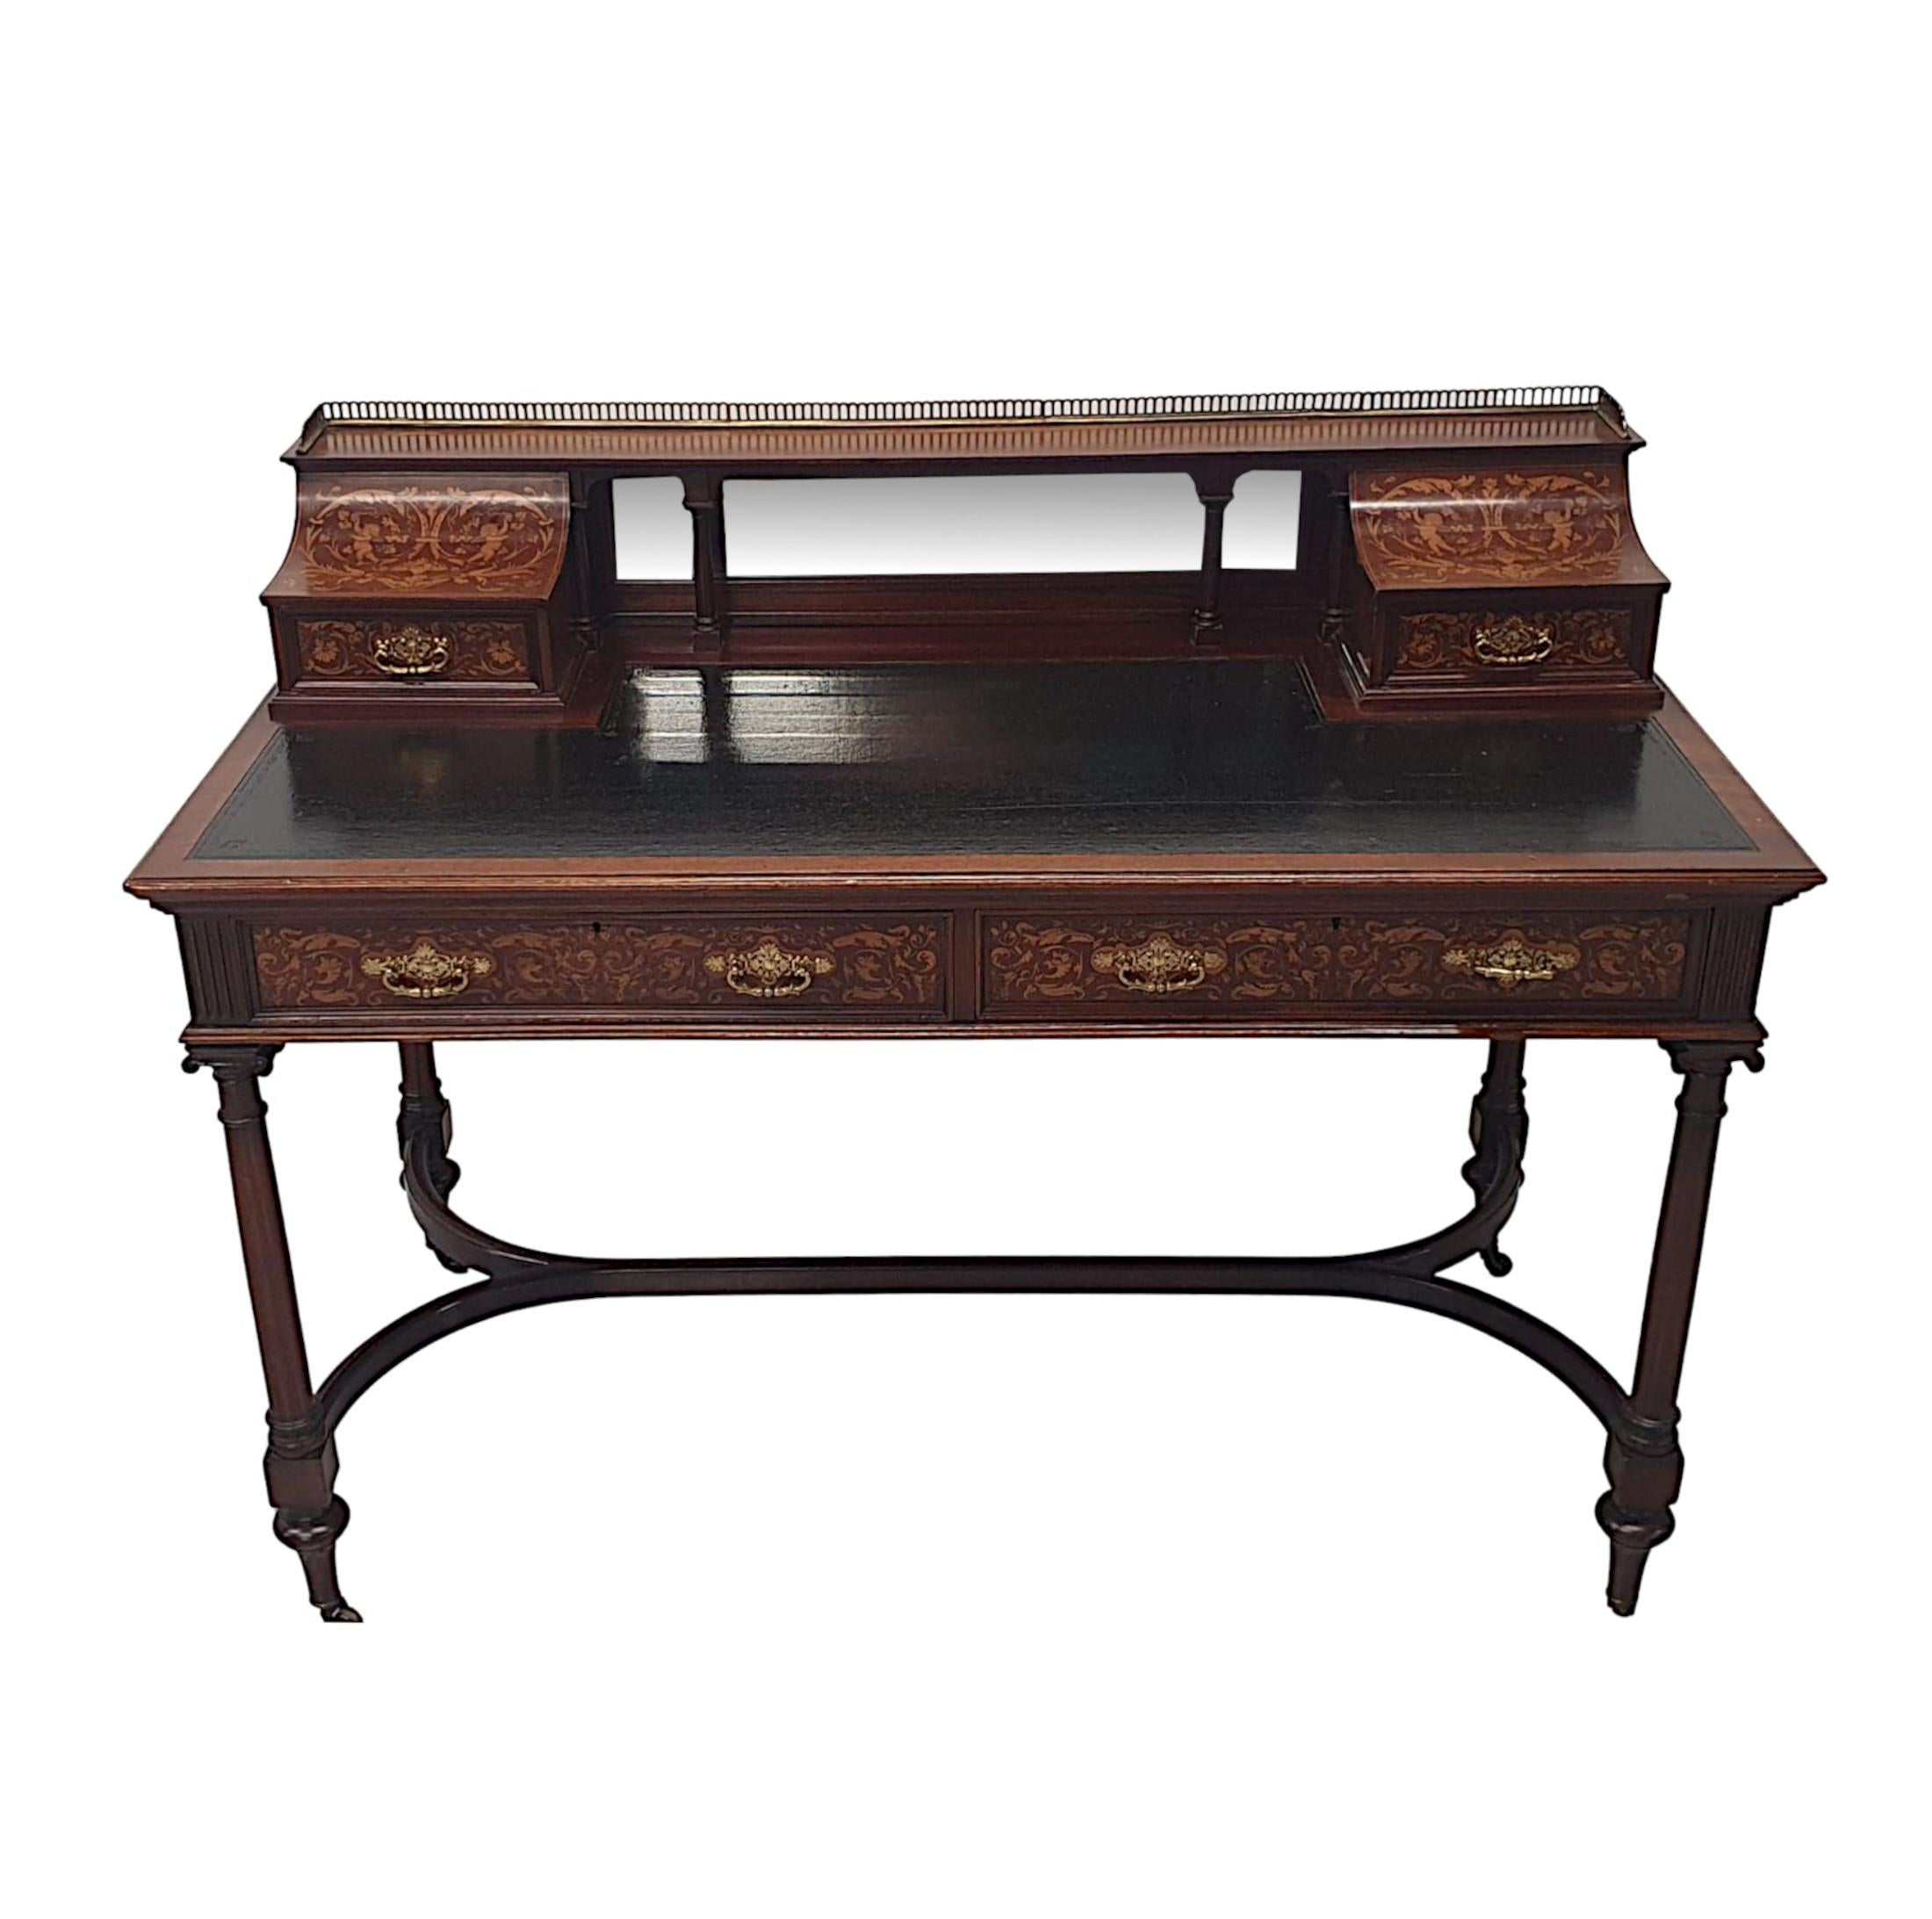 A fabulous Edwardian mahogany desk attributed to Edward and Roberts, richly patinated, line inlaid and with exquisite marquetry detail throughout depicting Neoclassical motifs comprising of cherubs, flowerheads, scrolling foliate and a pair of